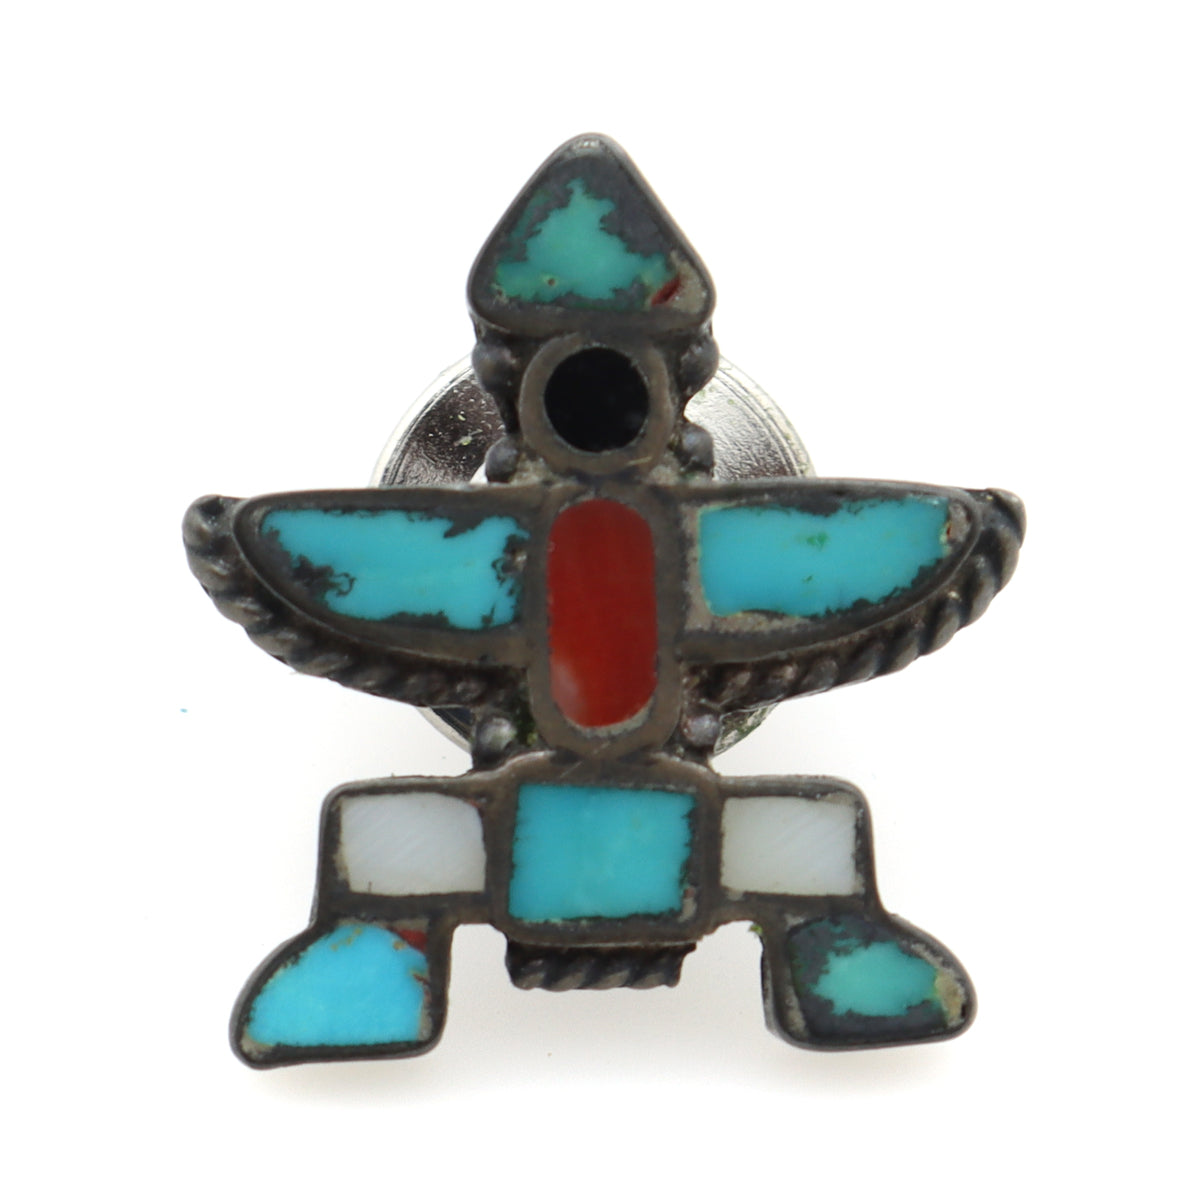 Zuni Multi-Stone Channel Inlay and Silver Knifewing God Tie Tack c. 1950s, 0.75" x 0.75" (J91244B-1120-007)
